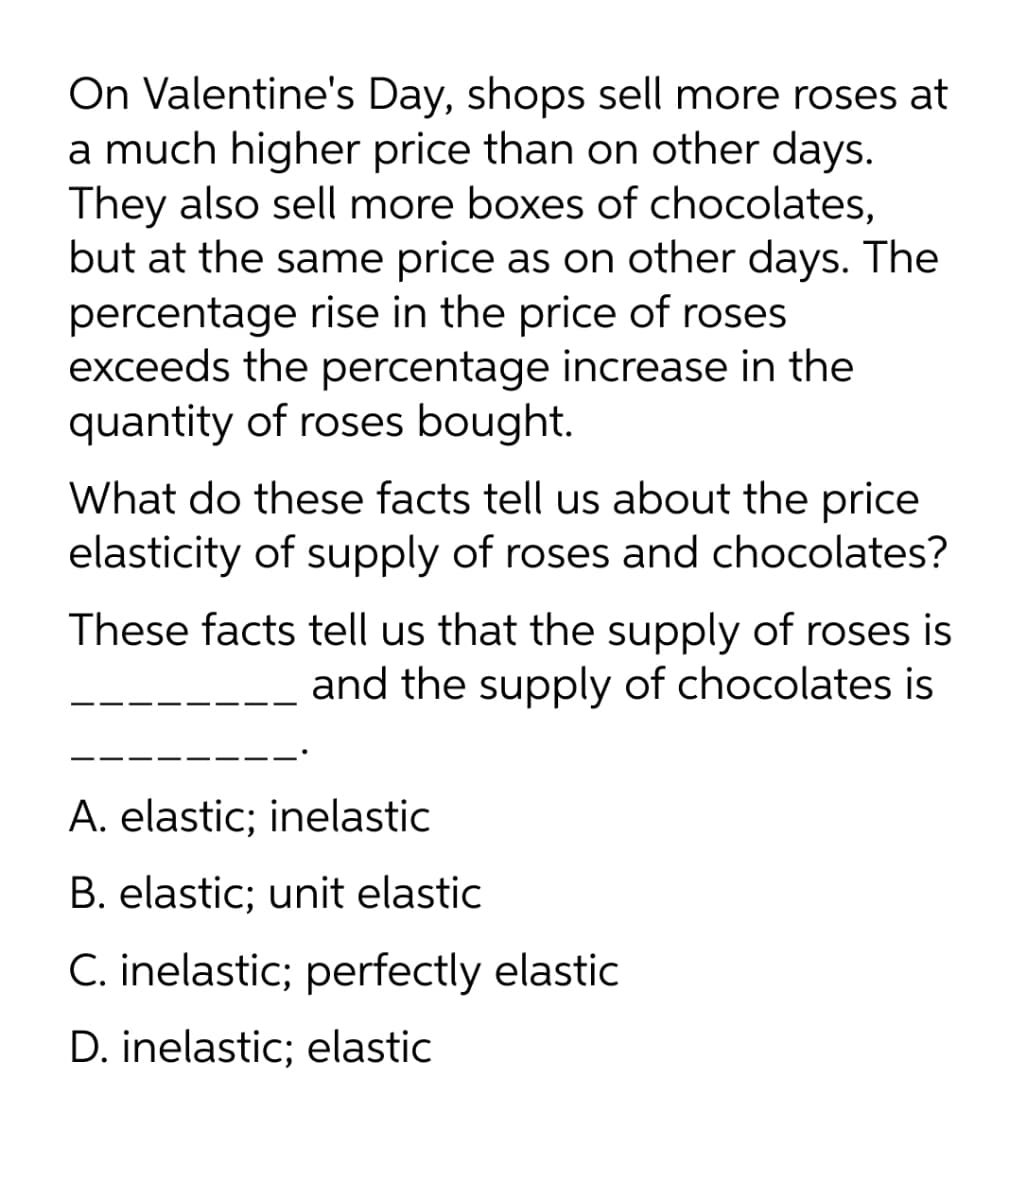 On Valentine's Day, shops sell more roses at
a much higher price than on other days.
They also sell more boxes of chocolates,
but at the same price as on other days. The
percentage rise in the price of roses
exceeds the percentage increase in the
quantity of roses bought.
What do these facts tell us about the price
elasticity of supply of roses and chocolates?
These facts tell us that the supply of roses is
and the supply of chocolates is
A. elastic; inelastic
B. elastic; unit elastic
C. inelastic; perfectly elastic
D. inelastic; elastic
